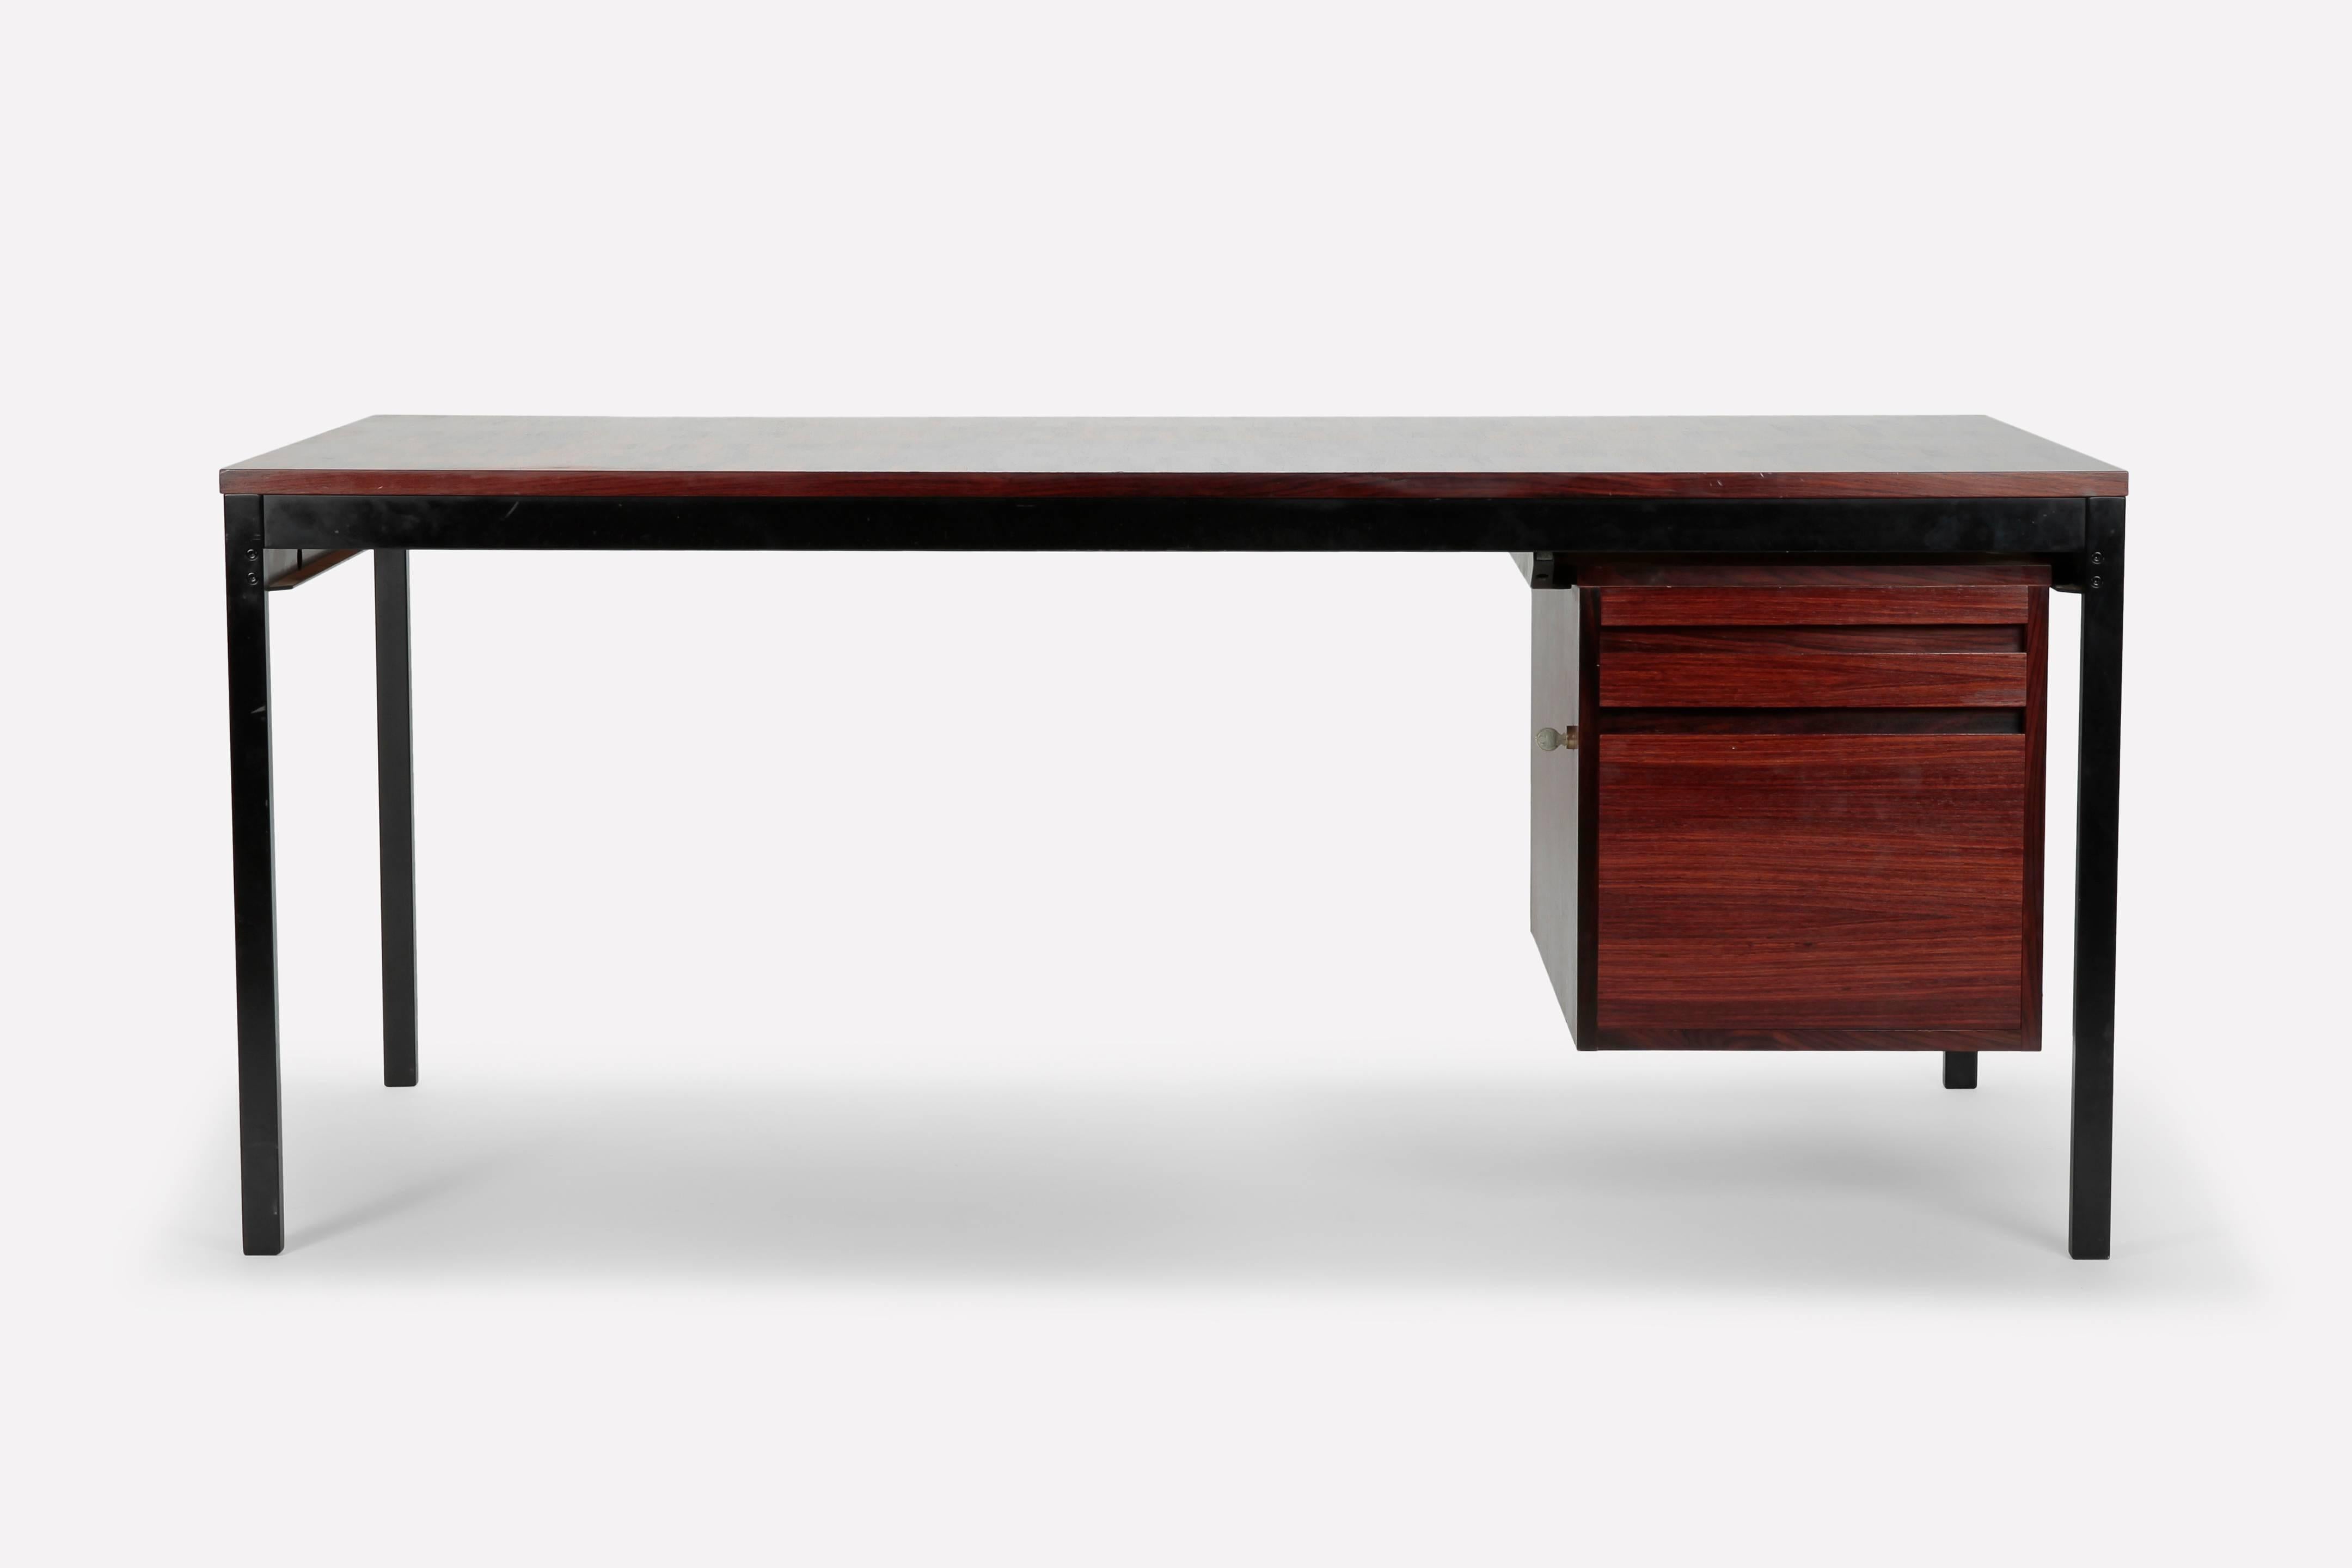 Dieter Waeckerlin DW II jacaranda desk with marquetry inlays and black metal frame and one office corpus. Original key available. Provenance is known. Manufactured by Idealheim in the 1960s. A top collectors item.